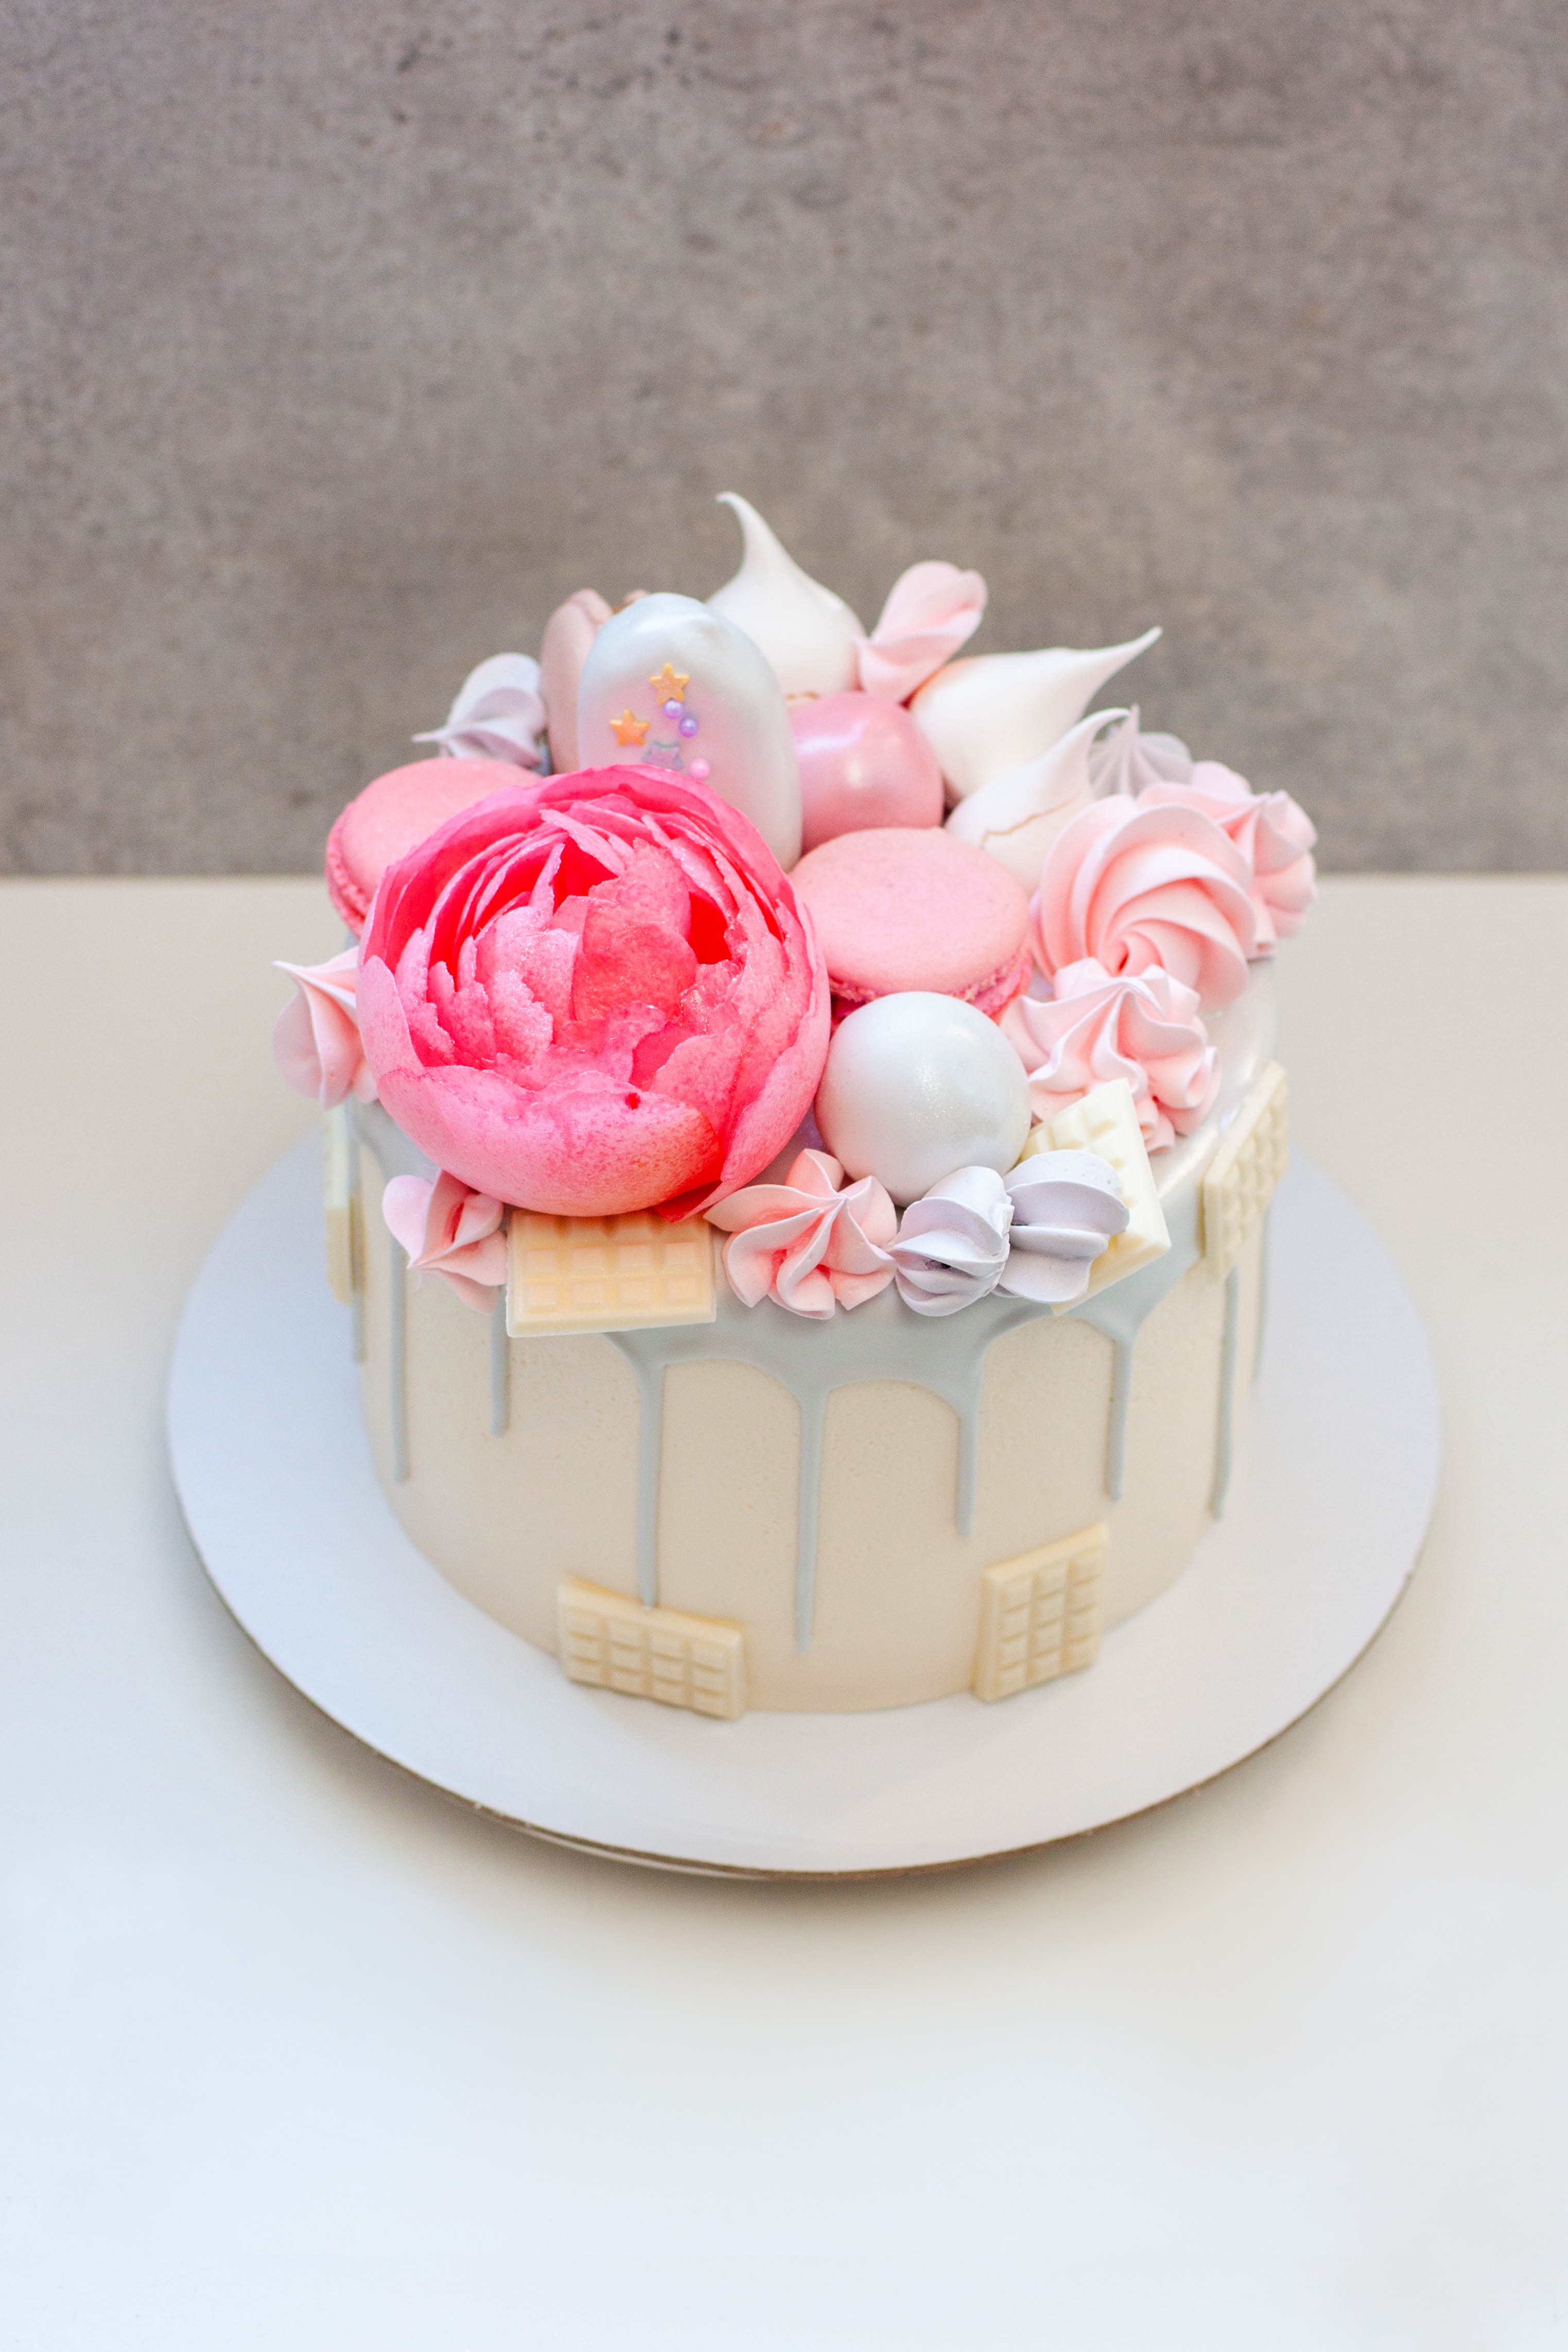 Beautiful and elegant cake decorated with melted grey chocolate, macaroons, edible pink peony flower, chocolate bites and meringues | Source: Getty Images